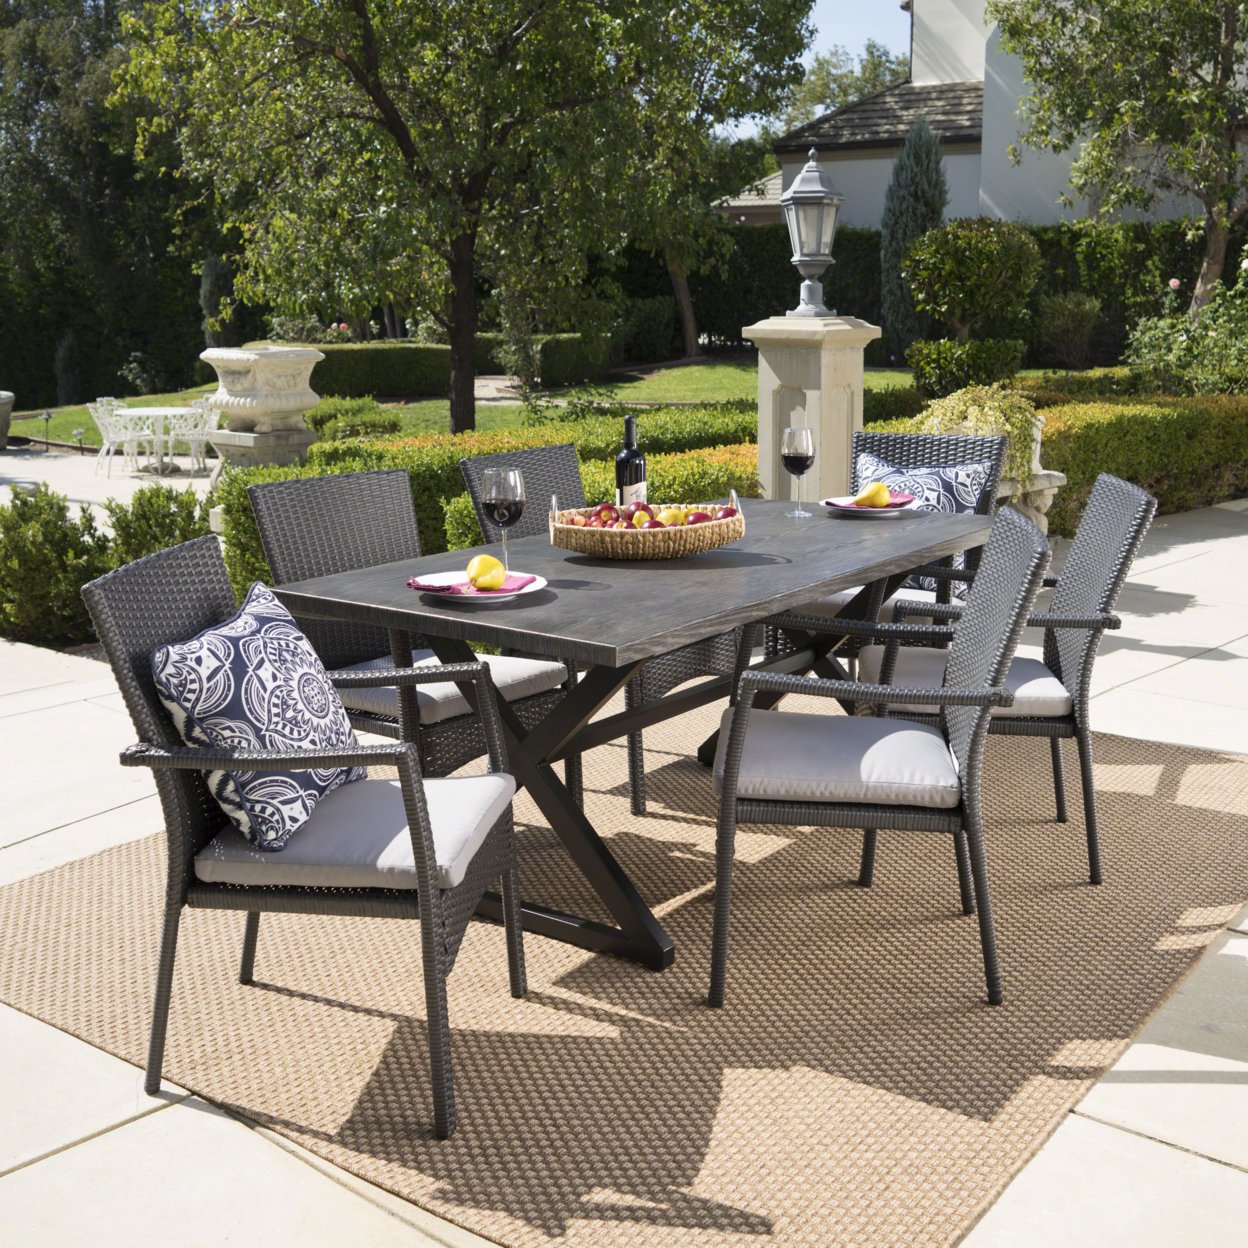 Adelade Outdoor 7 Piece Aluminum Dining Set With Wicker Dining Chairs - Dark Gray/Grey